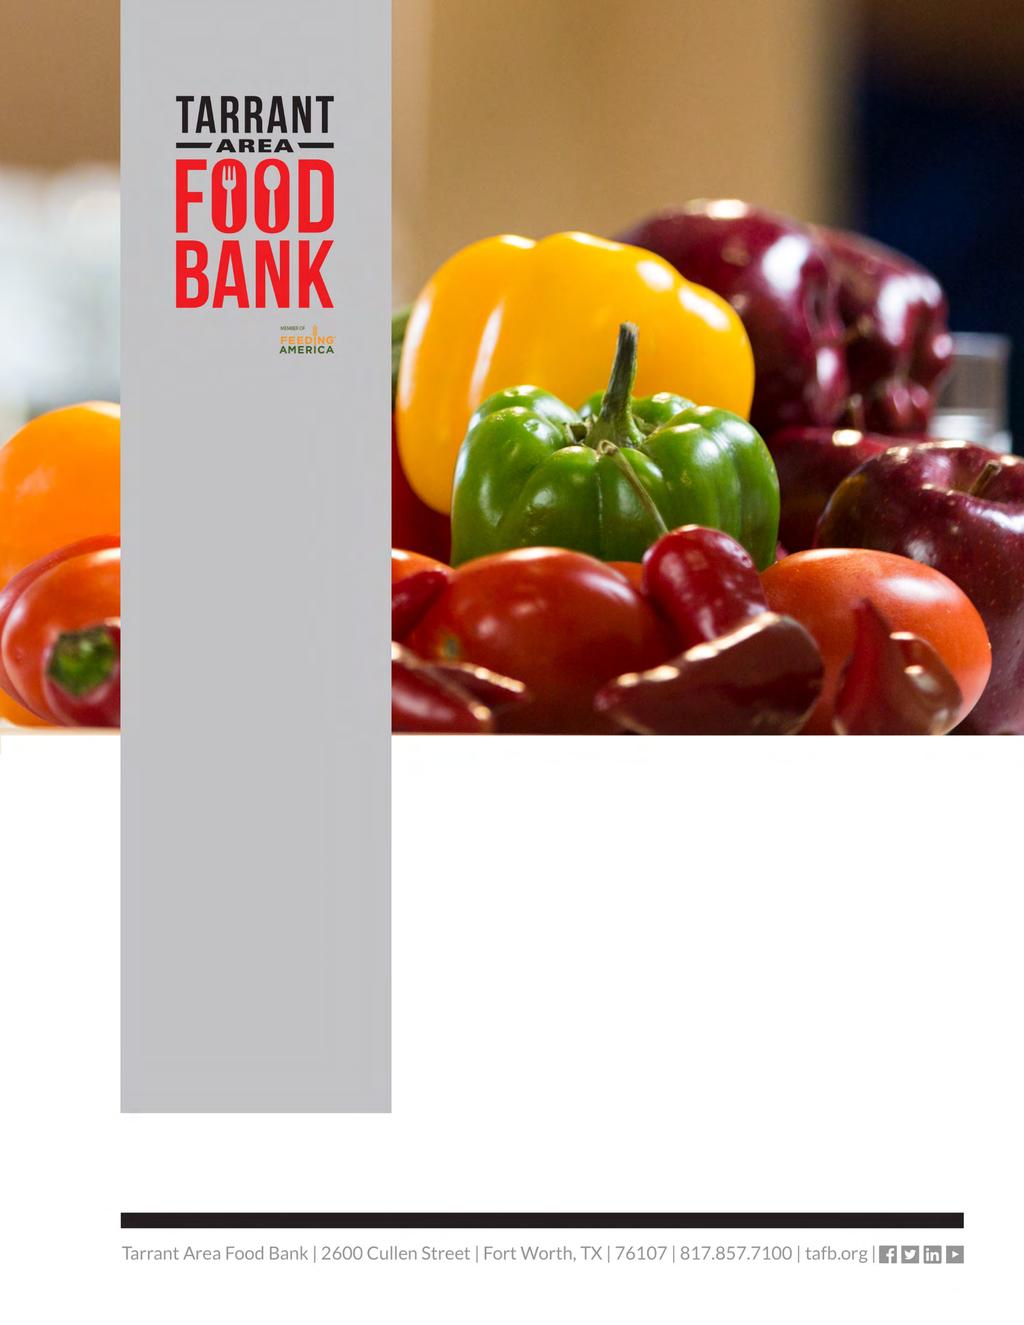 Produce Handling Toolkit updated May 29, 2014 by Feeding America TAFB Mission: Empowering communities to